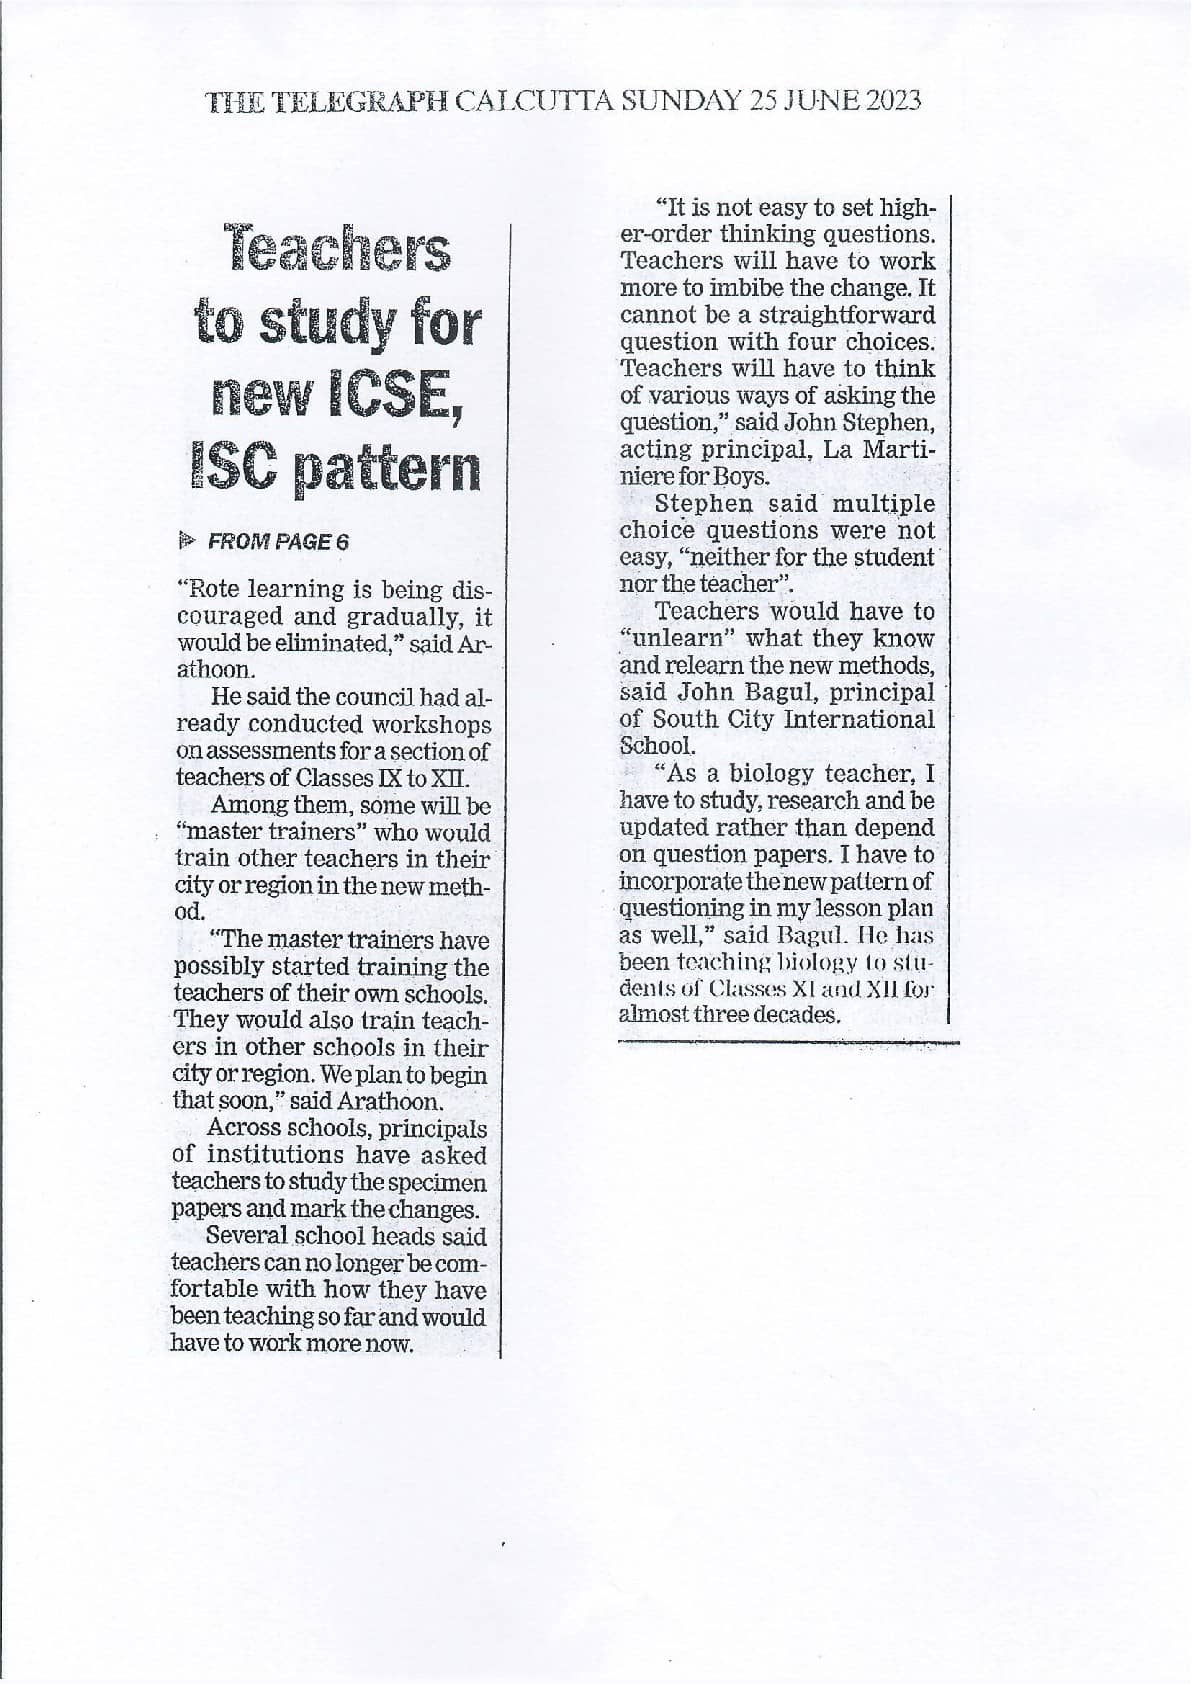 ICSE & ISC Council Head Mandates New Specimen Papers to Prepare Teachers for Updated Exam Pattern